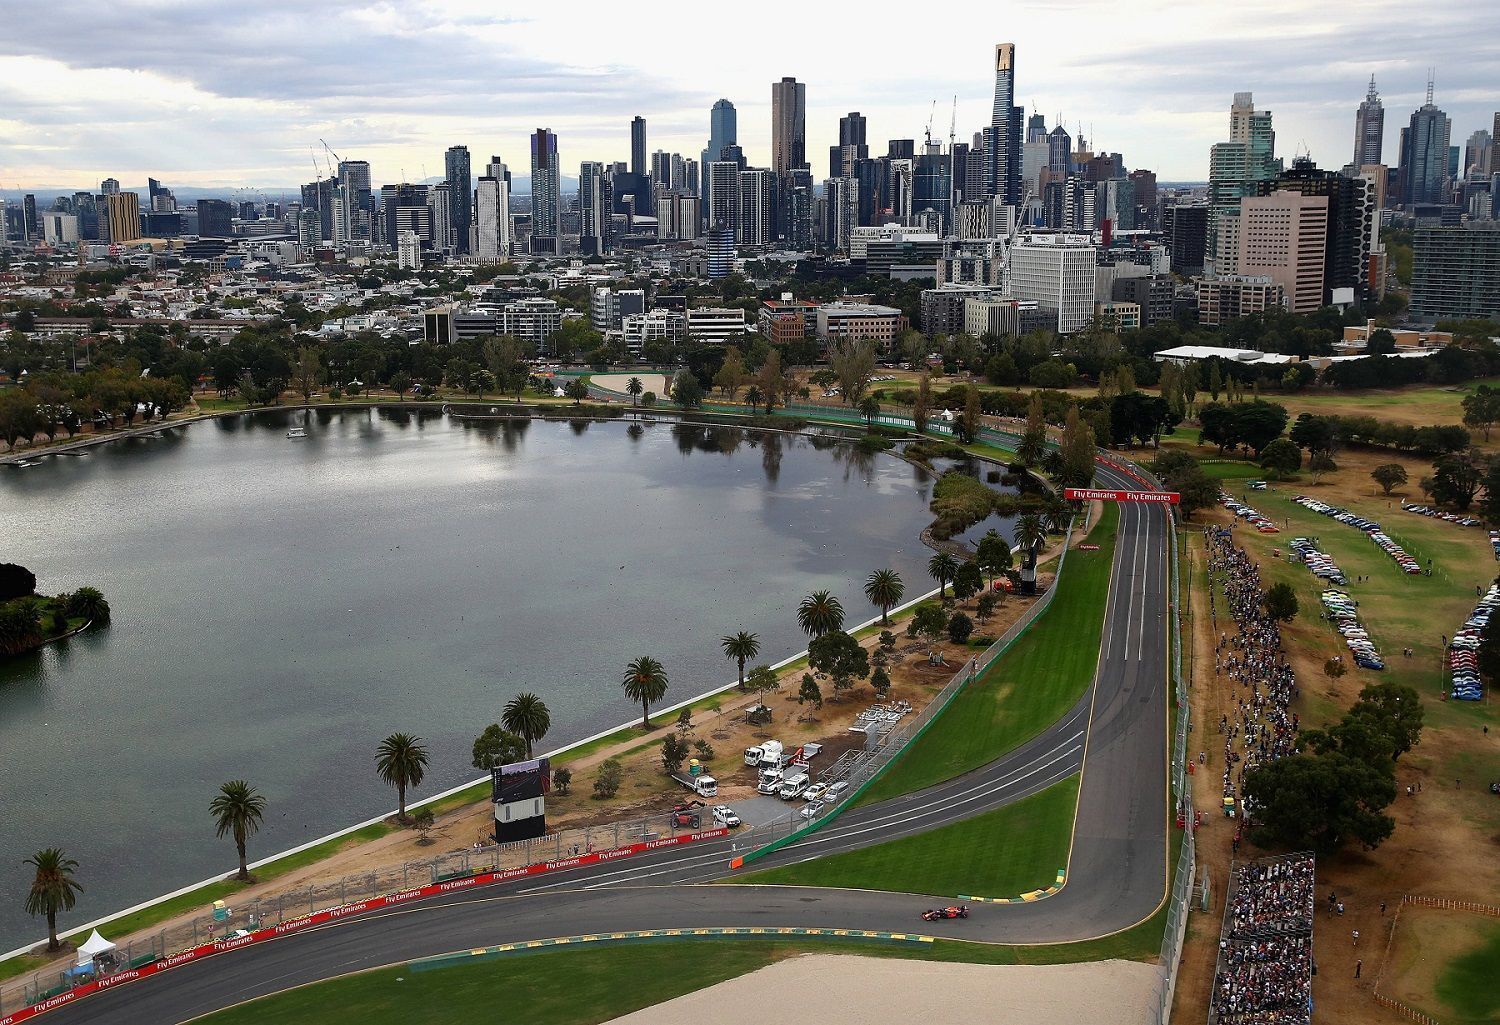 F1 to host first-ever 'launch event' ahead of 2019 opener in Melbourne